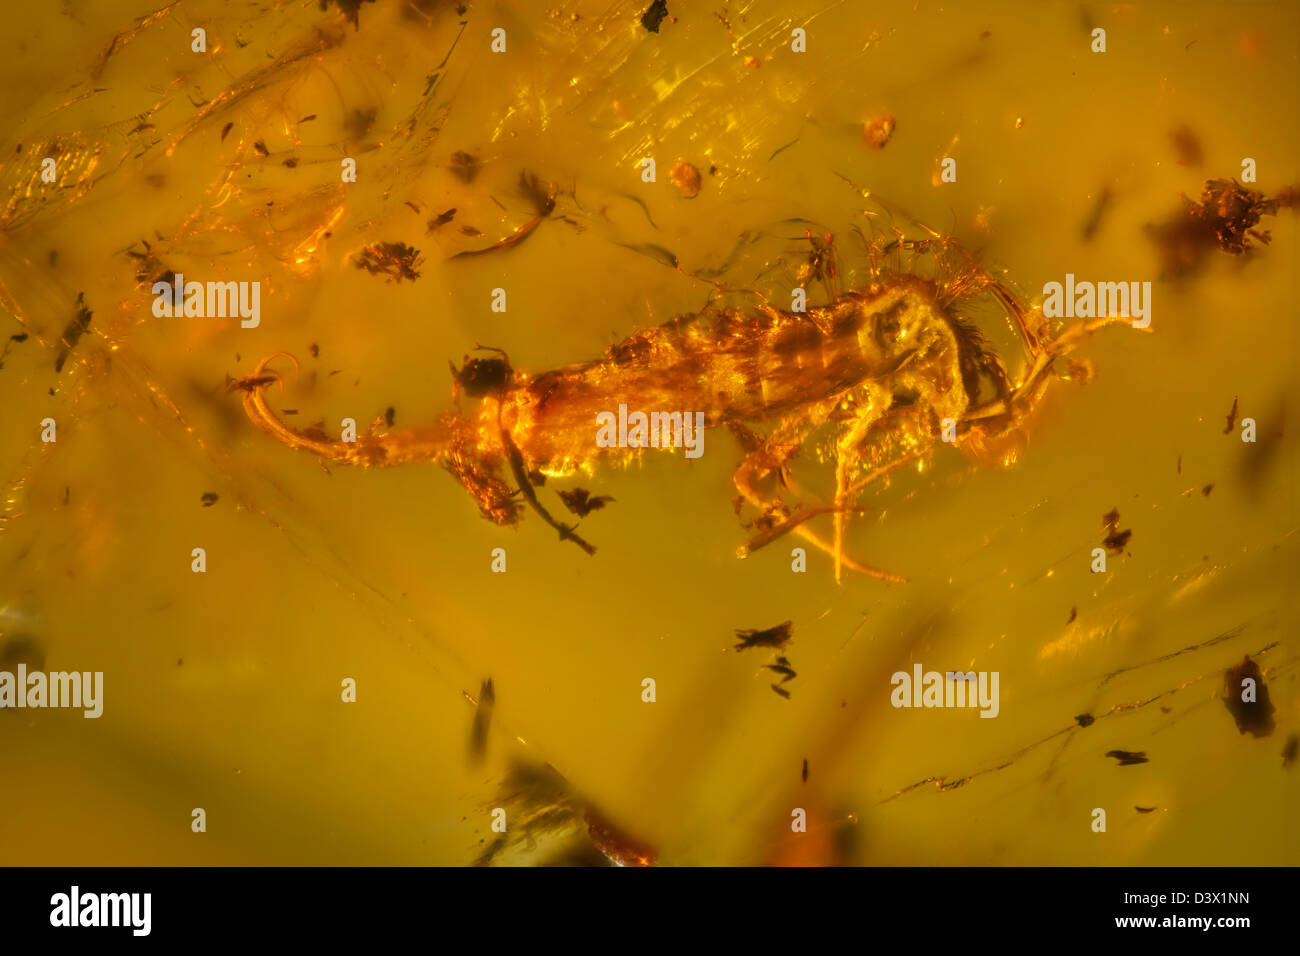 Dominican amber with insects captive, macro view of insects frozen in time Stock Photo